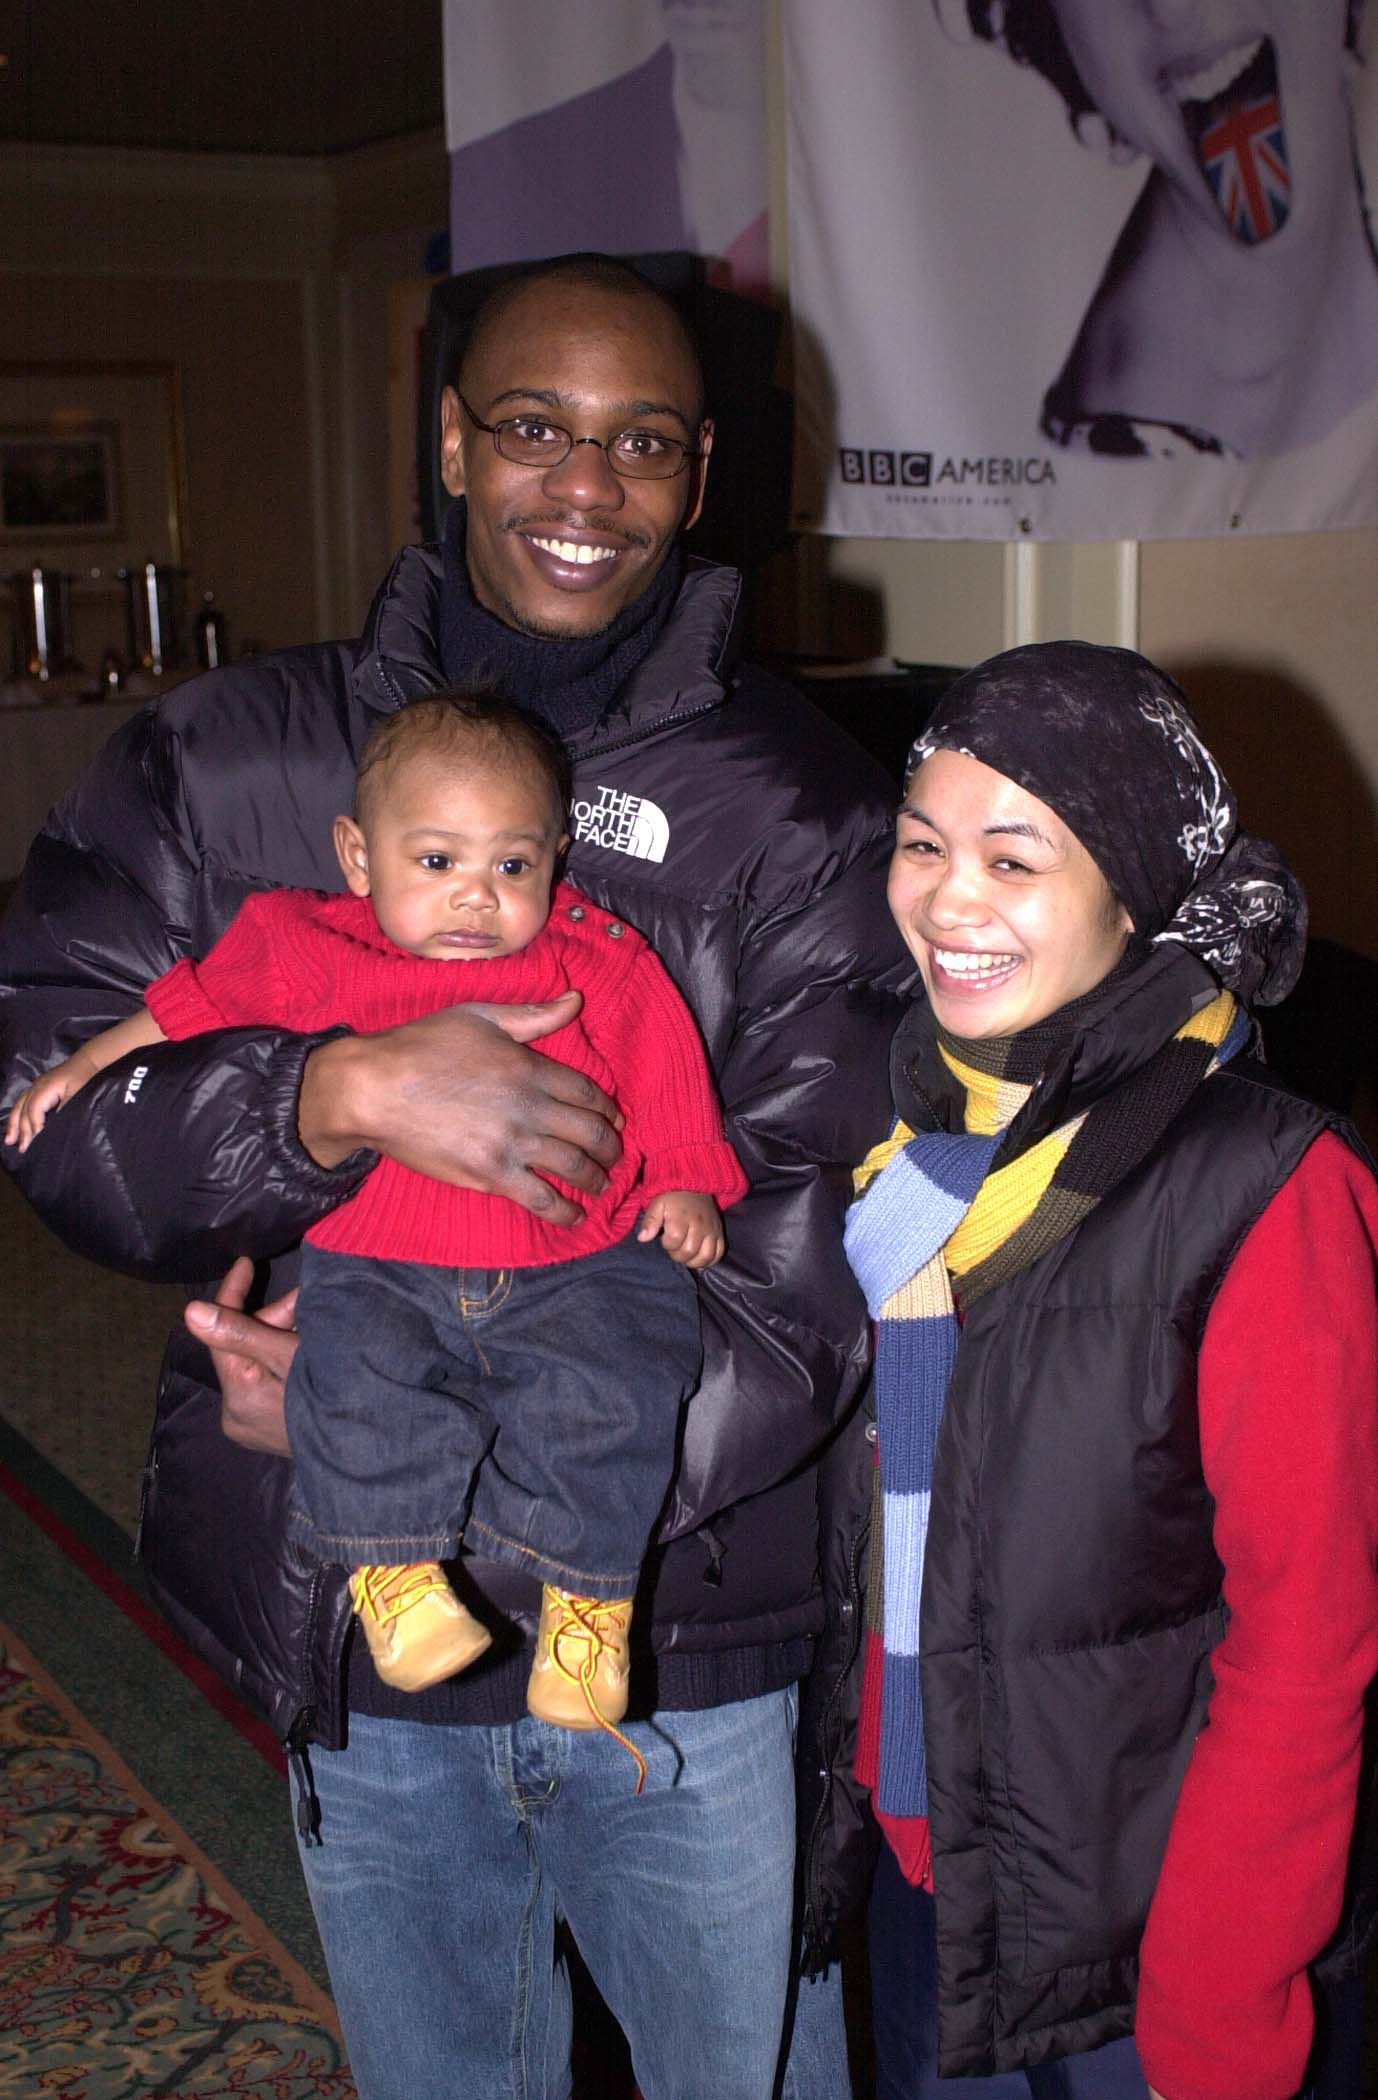 Dave Chappelle with wife Elaine and son Sulayman at the HBO US Comedy Arts Festival in 2001 in Aspen, Colorado. | Source: Gerry Images